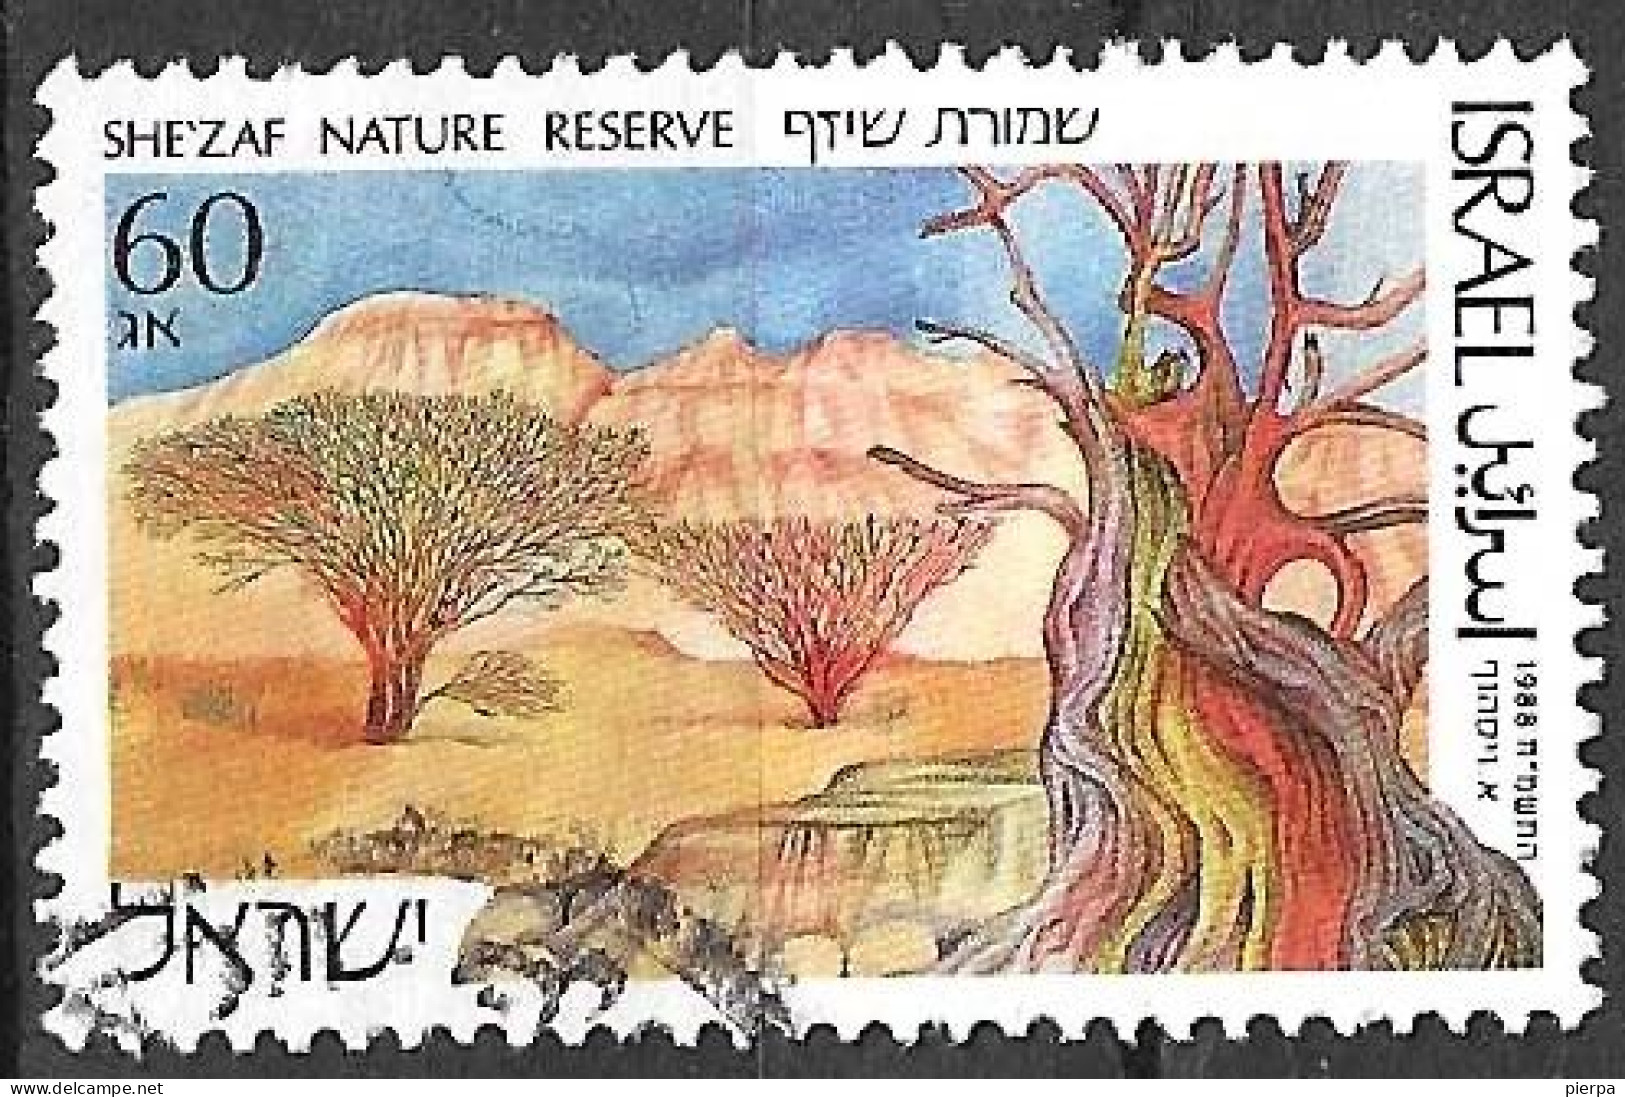 ISRAELE - 1988 - RISERVA DEL NEGEV - USATO SENZA TAB (YVERT 1043 - MICHEL1100) - Used Stamps (without Tabs)